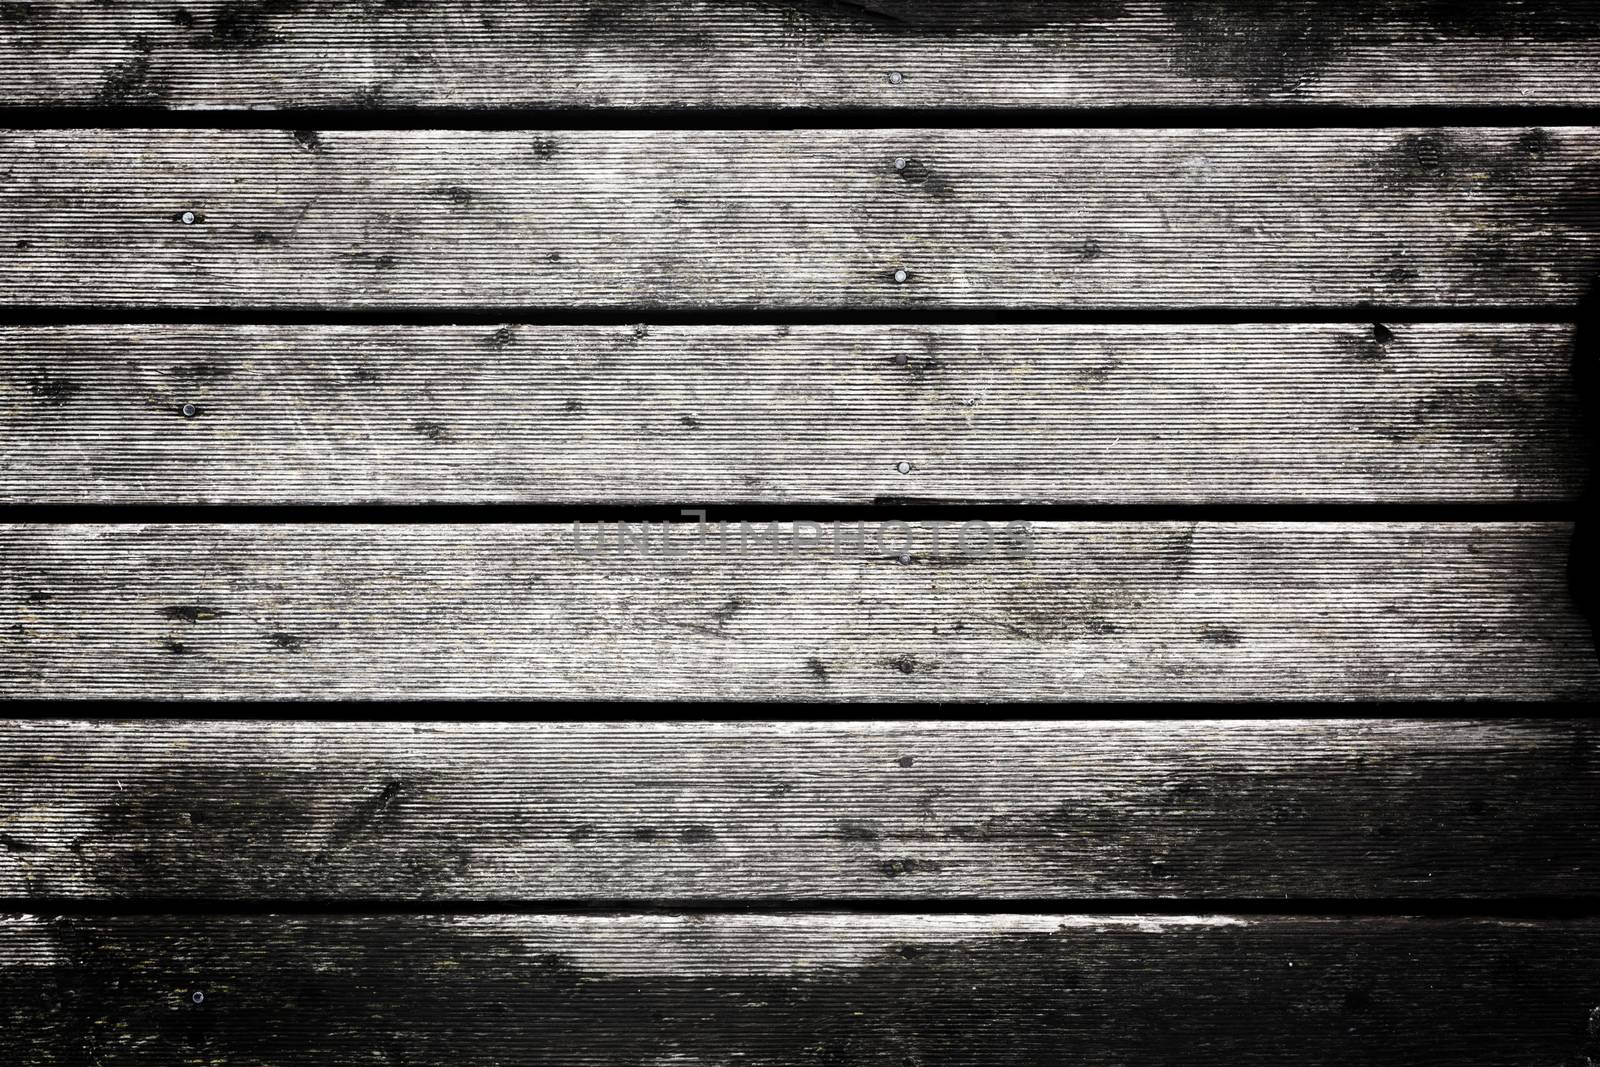 Grunge rustic real wood planks, board. Perfect for background, texture, high quality